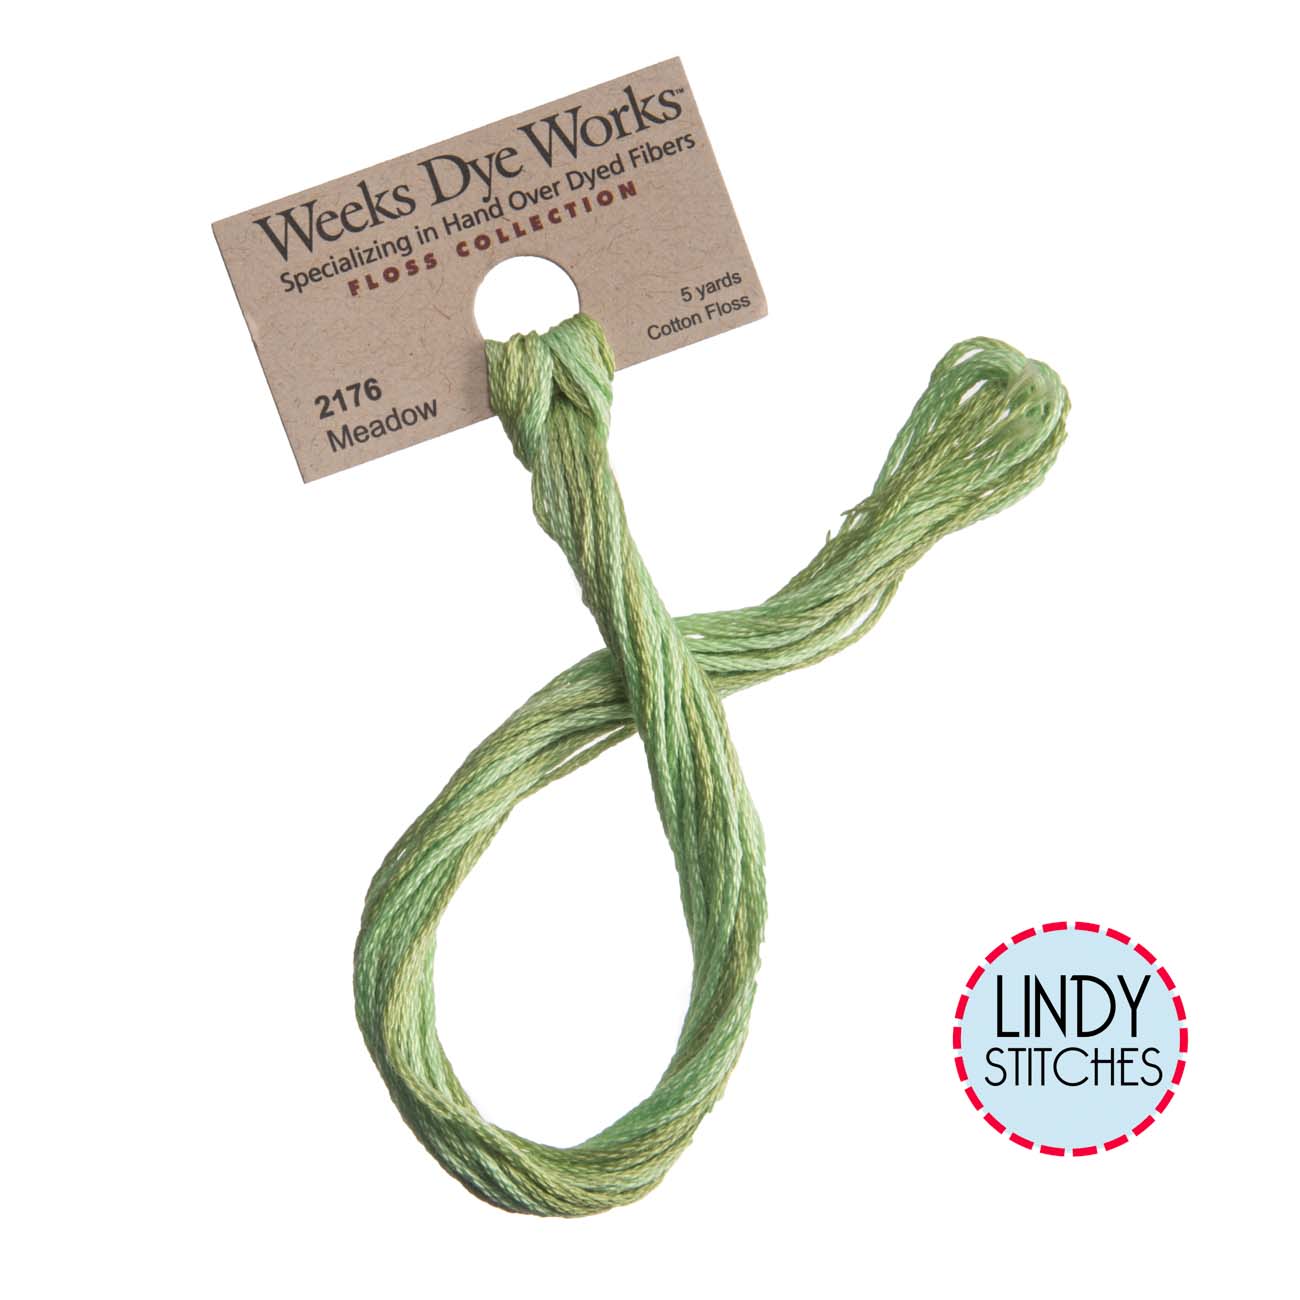 Meadow Weeks Dye Works Floss Hand Dyed Cotton Skein 2176